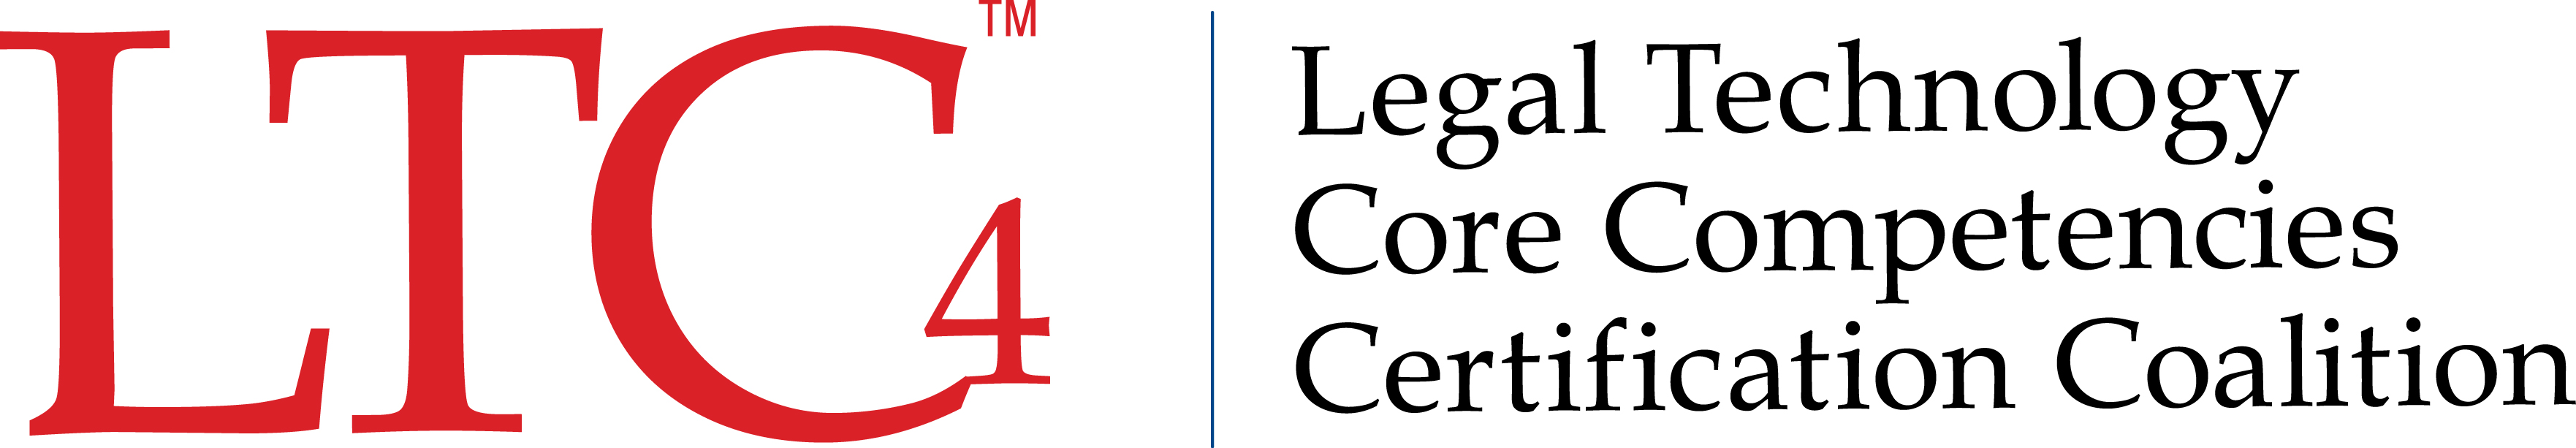 News from LTC4 - THE industry standard for tech competence